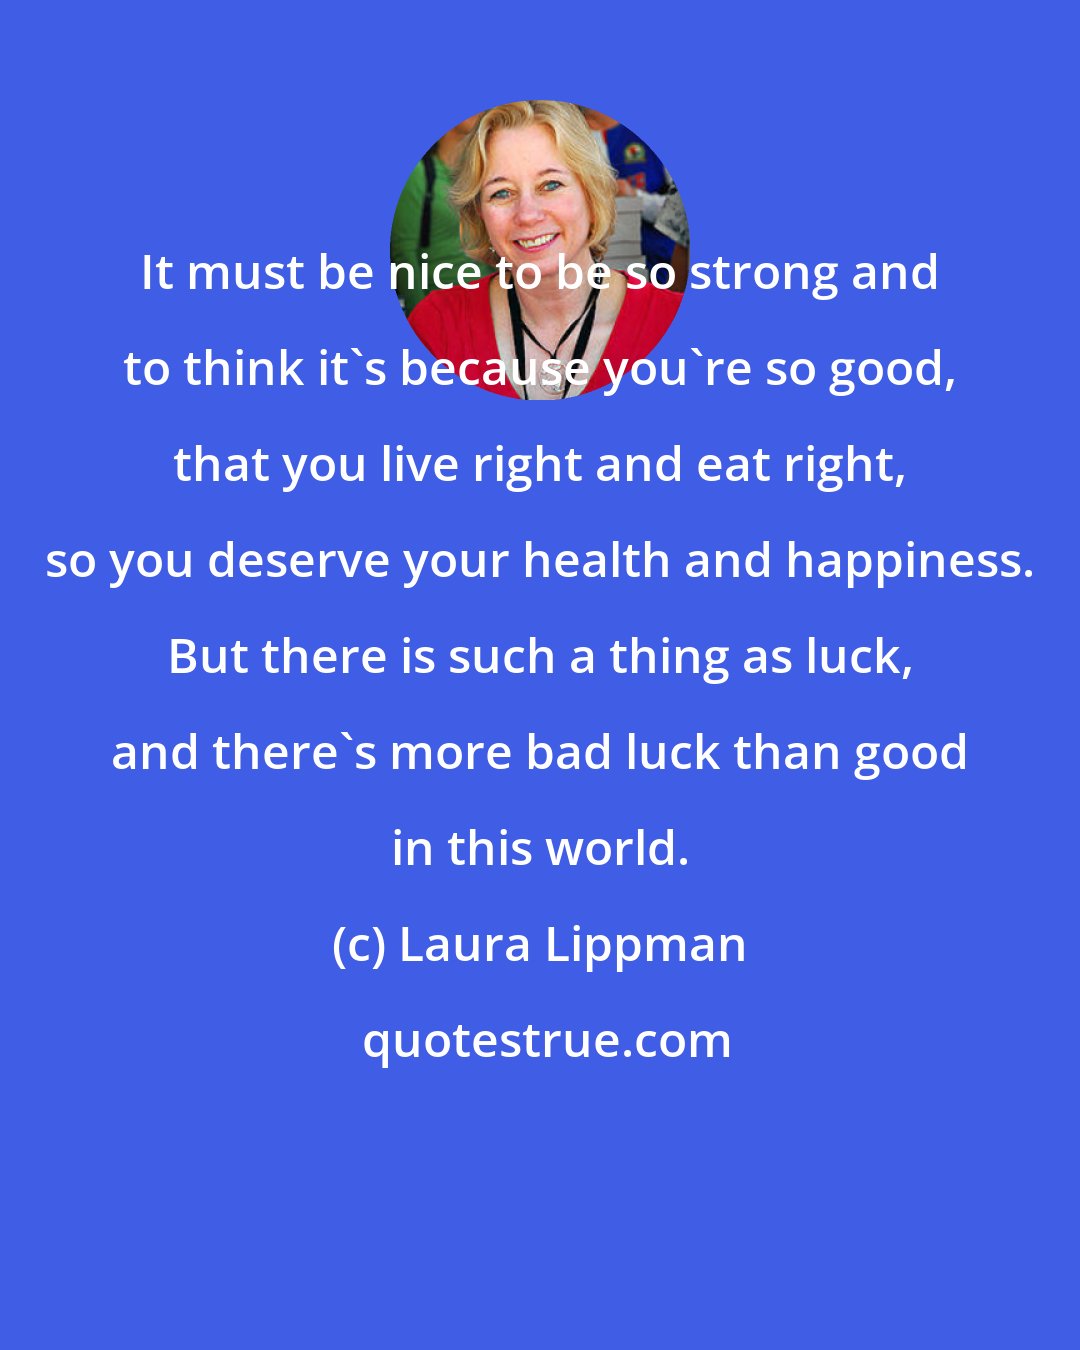 Laura Lippman: It must be nice to be so strong and to think it's because you're so good, that you live right and eat right, so you deserve your health and happiness. But there is such a thing as luck, and there's more bad luck than good in this world.